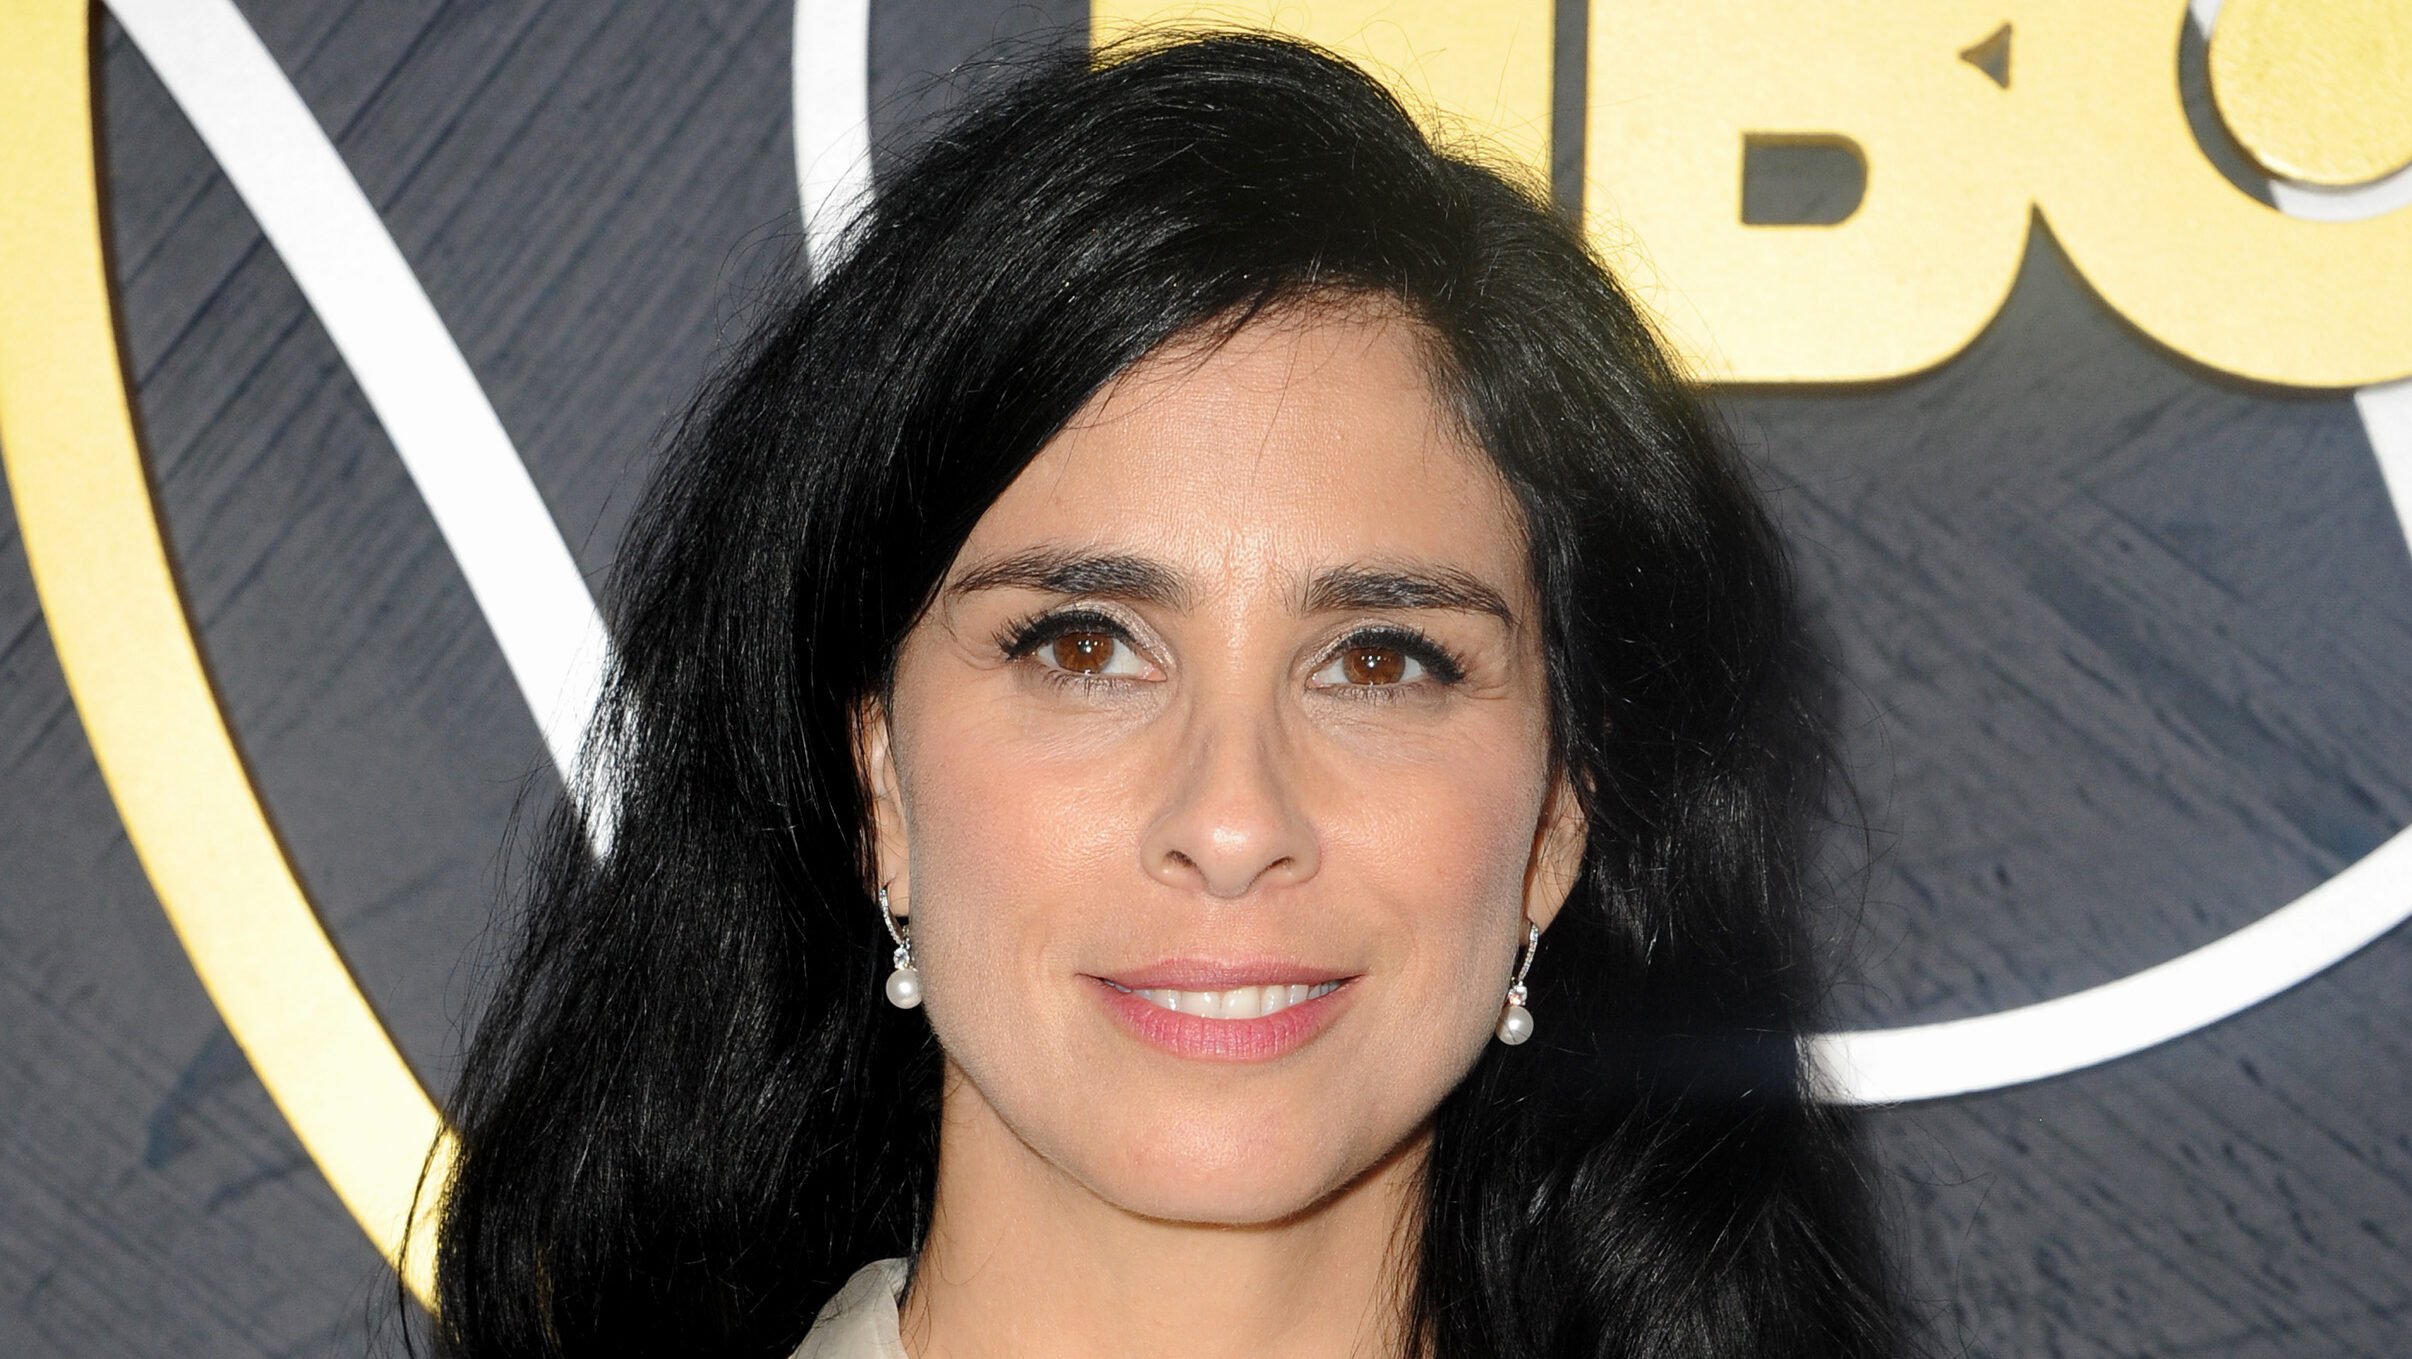 Sarah Silverman sues OpenAI and Meta over alleged copyright infringement in AI training – Music Business Worldwide